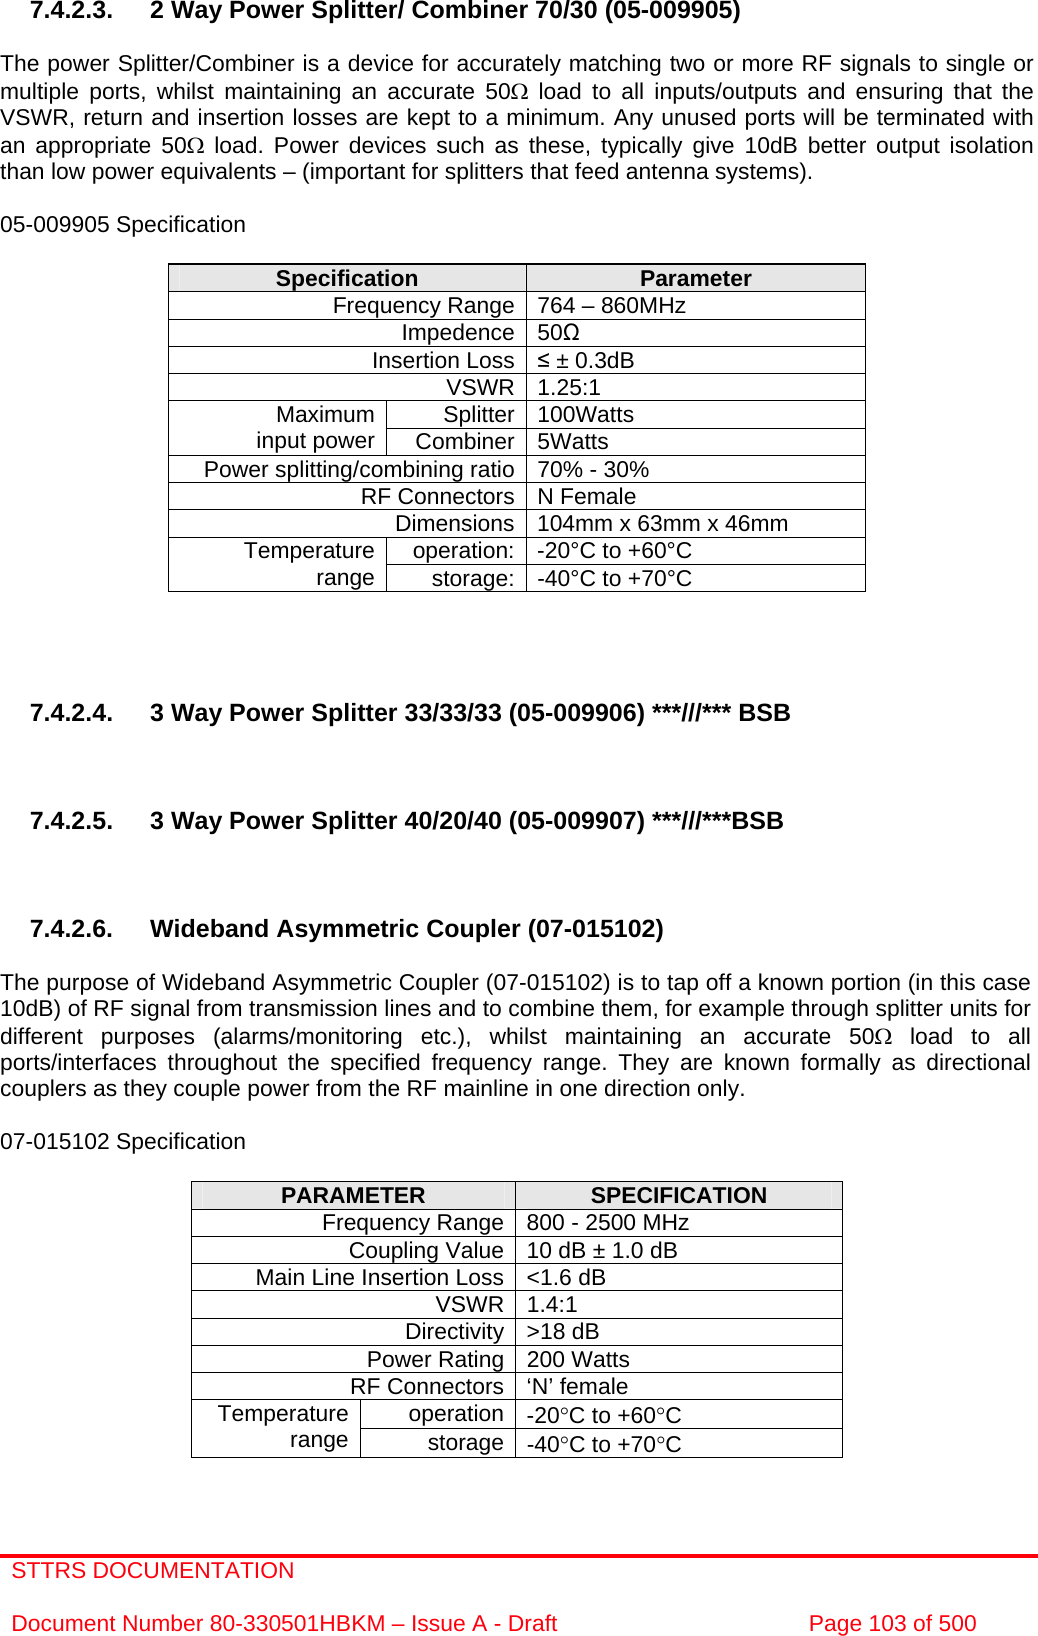 STTRS DOCUMENTATION  Document Number 80-330501HBKM – Issue A - Draft  Page 103 of 500   7.4.2.3.  2 Way Power Splitter/ Combiner 70/30 (05-009905)   The power Splitter/Combiner is a device for accurately matching two or more RF signals to single or multiple ports, whilst maintaining an accurate 50Ω load to all inputs/outputs and ensuring that the VSWR, return and insertion losses are kept to a minimum. Any unused ports will be terminated with an appropriate 50Ω load. Power devices such as these, typically give 10dB better output isolation than low power equivalents – (important for splitters that feed antenna systems).  05-009905 Specification  Specification  Parameter Frequency Range 764 – 860MHz Impedence 50 Insertion Loss  ± 0.3dB VSWR 1.25:1 Splitter 100Watts Maximum input power  Combiner 5Watts Power splitting/combining ratio 70% - 30% RF Connectors N Female Dimensions 104mm x 63mm x 46mm operation: -20°C to +60°C Temperature range  storage: -40°C to +70°C     7.4.2.4.  3 Way Power Splitter 33/33/33 (05-009906) ***///*** BSB    7.4.2.5.  3 Way Power Splitter 40/20/40 (05-009907) ***///***BSB     7.4.2.6. Wideband Asymmetric Coupler (07-015102)  The purpose of Wideband Asymmetric Coupler (07-015102) is to tap off a known portion (in this case 10dB) of RF signal from transmission lines and to combine them, for example through splitter units for different purposes (alarms/monitoring etc.), whilst maintaining an accurate 50Ω load to all ports/interfaces throughout the specified frequency range. They are known formally as directional couplers as they couple power from the RF mainline in one direction only.   07-015102 Specification  PARAMETER  SPECIFICATION Frequency Range 800 - 2500 MHz Coupling Value 10 dB ± 1.0 dB Main Line Insertion Loss &lt;1.6 dB VSWR 1.4:1 Directivity &gt;18 dB Power Rating 200 Watts RF Connectors ‘N’ female operation -20°C to +60°C Temperature range  storage -40°C to +70°C  